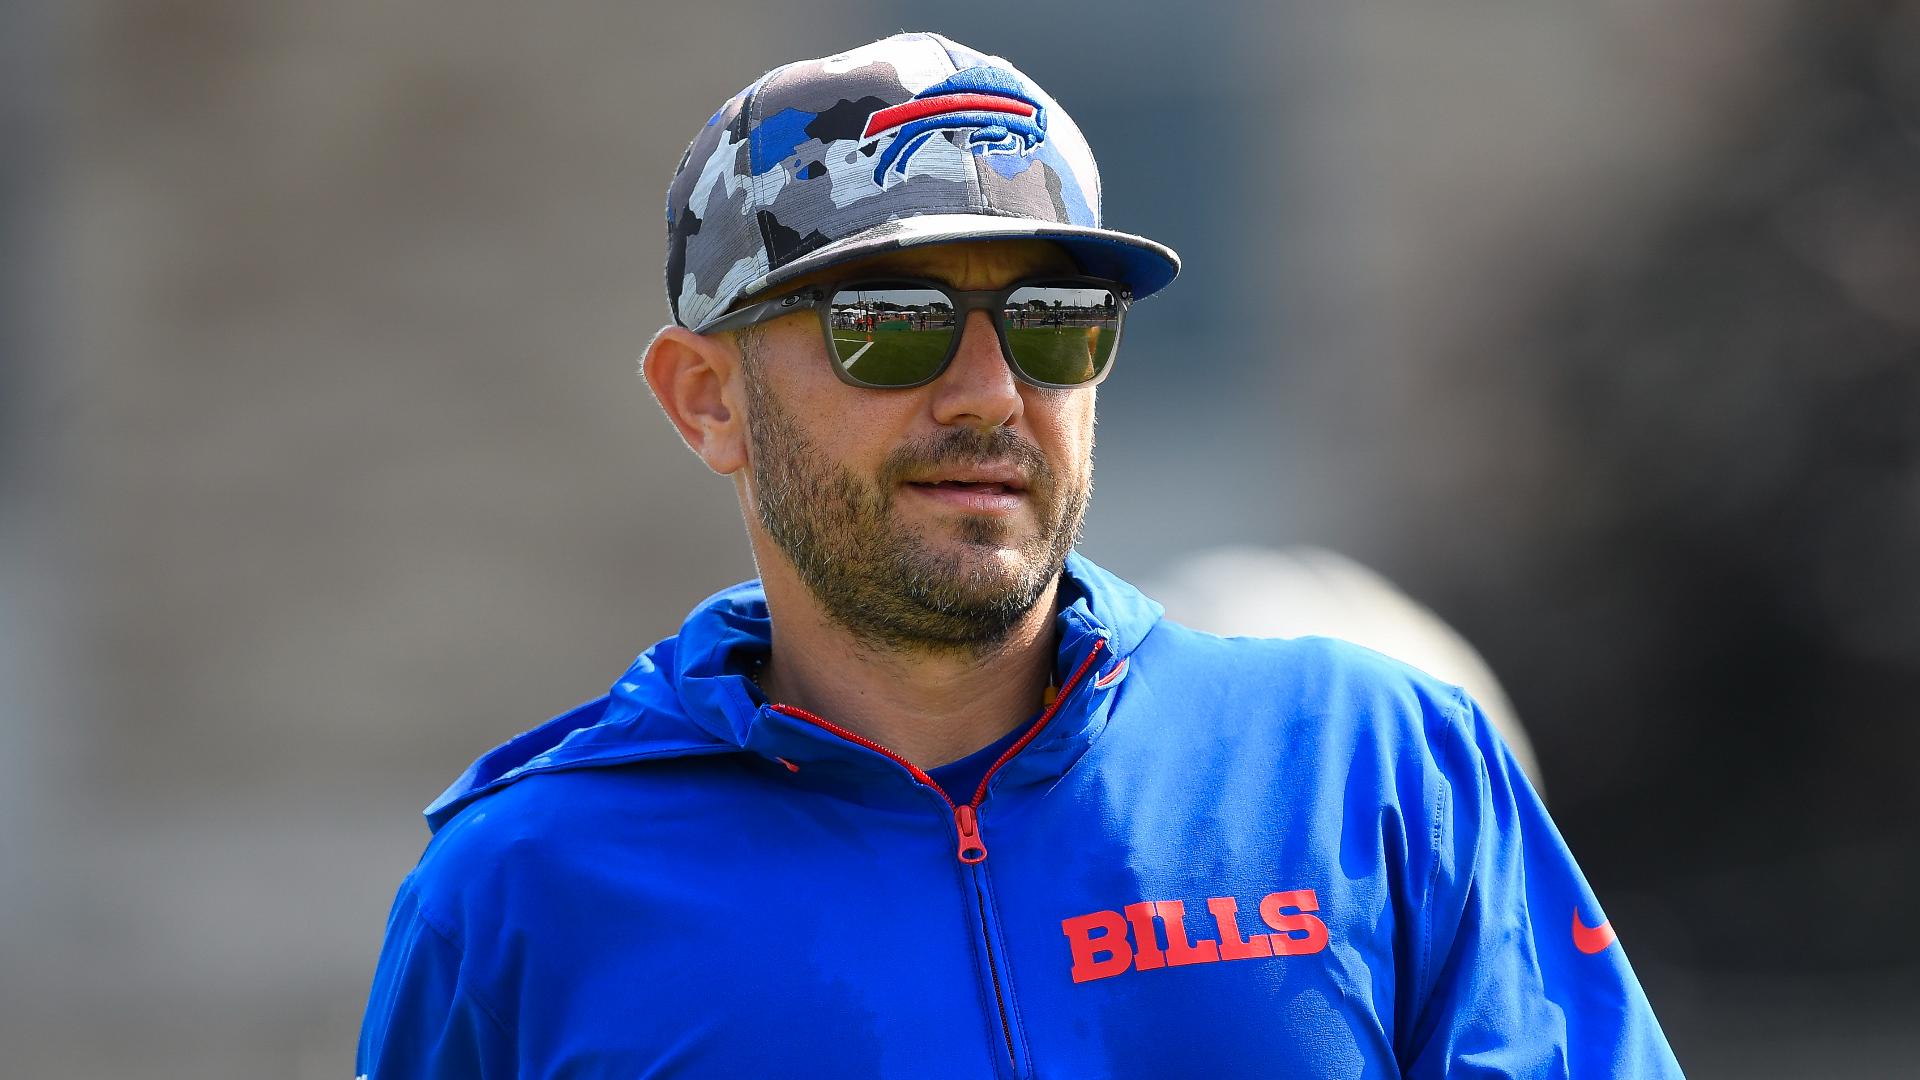 New Bills defensive coordinator getting as many reps as possible should he be called on as first-time playcaller.